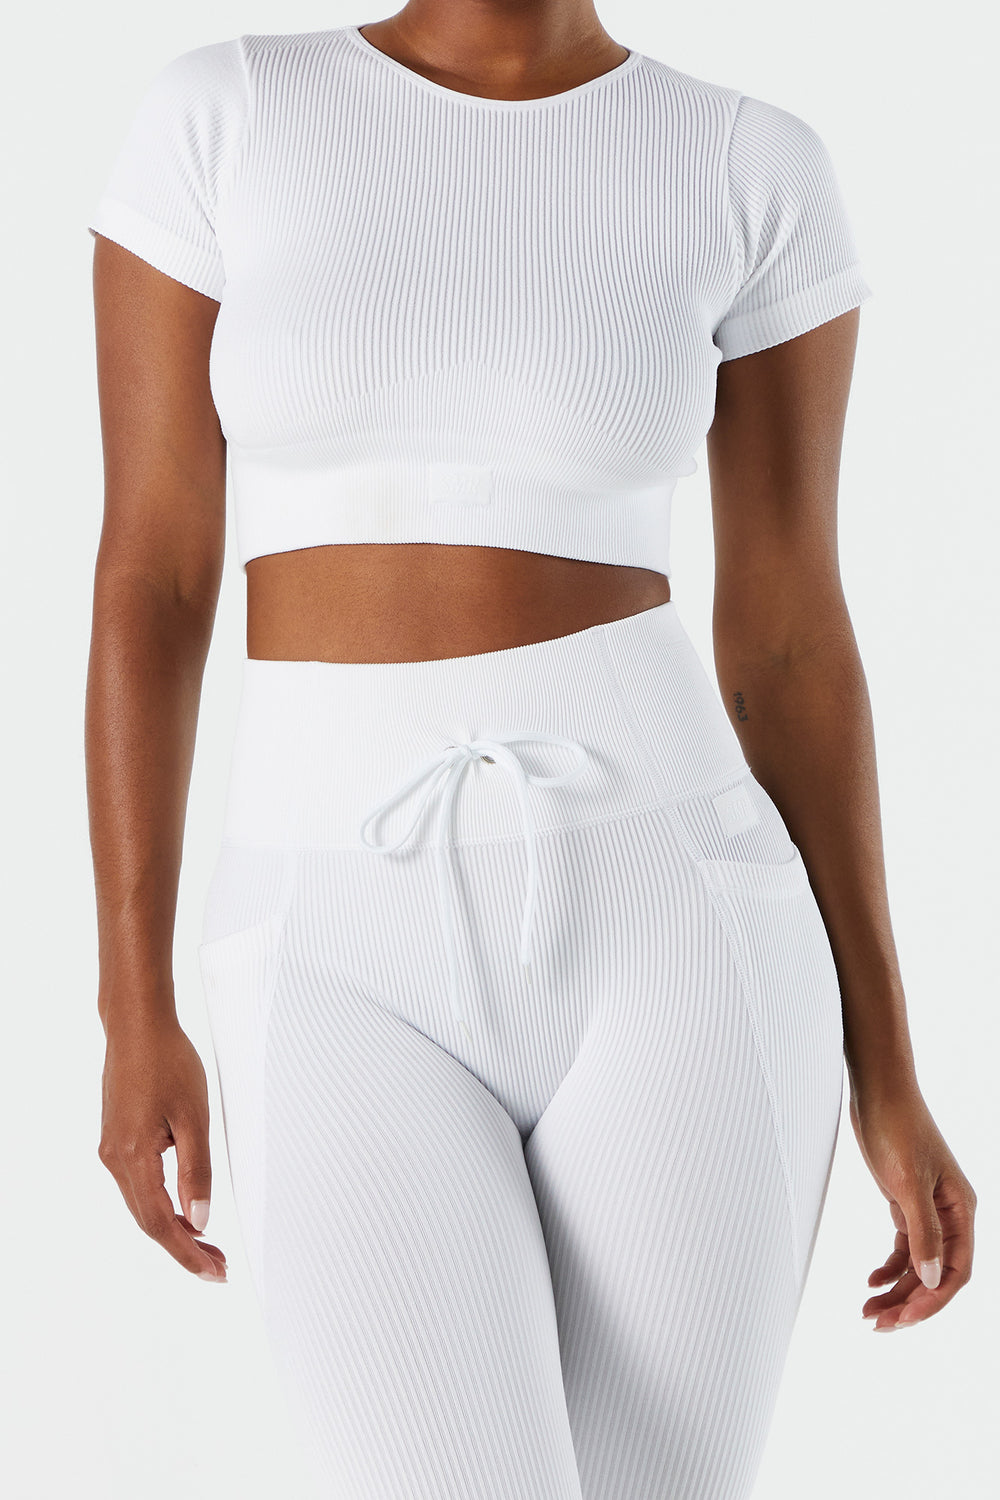 Sommer Ray Seamless Ribbed Active T-Shirt Sommer Ray Seamless Ribbed Active T-Shirt 13